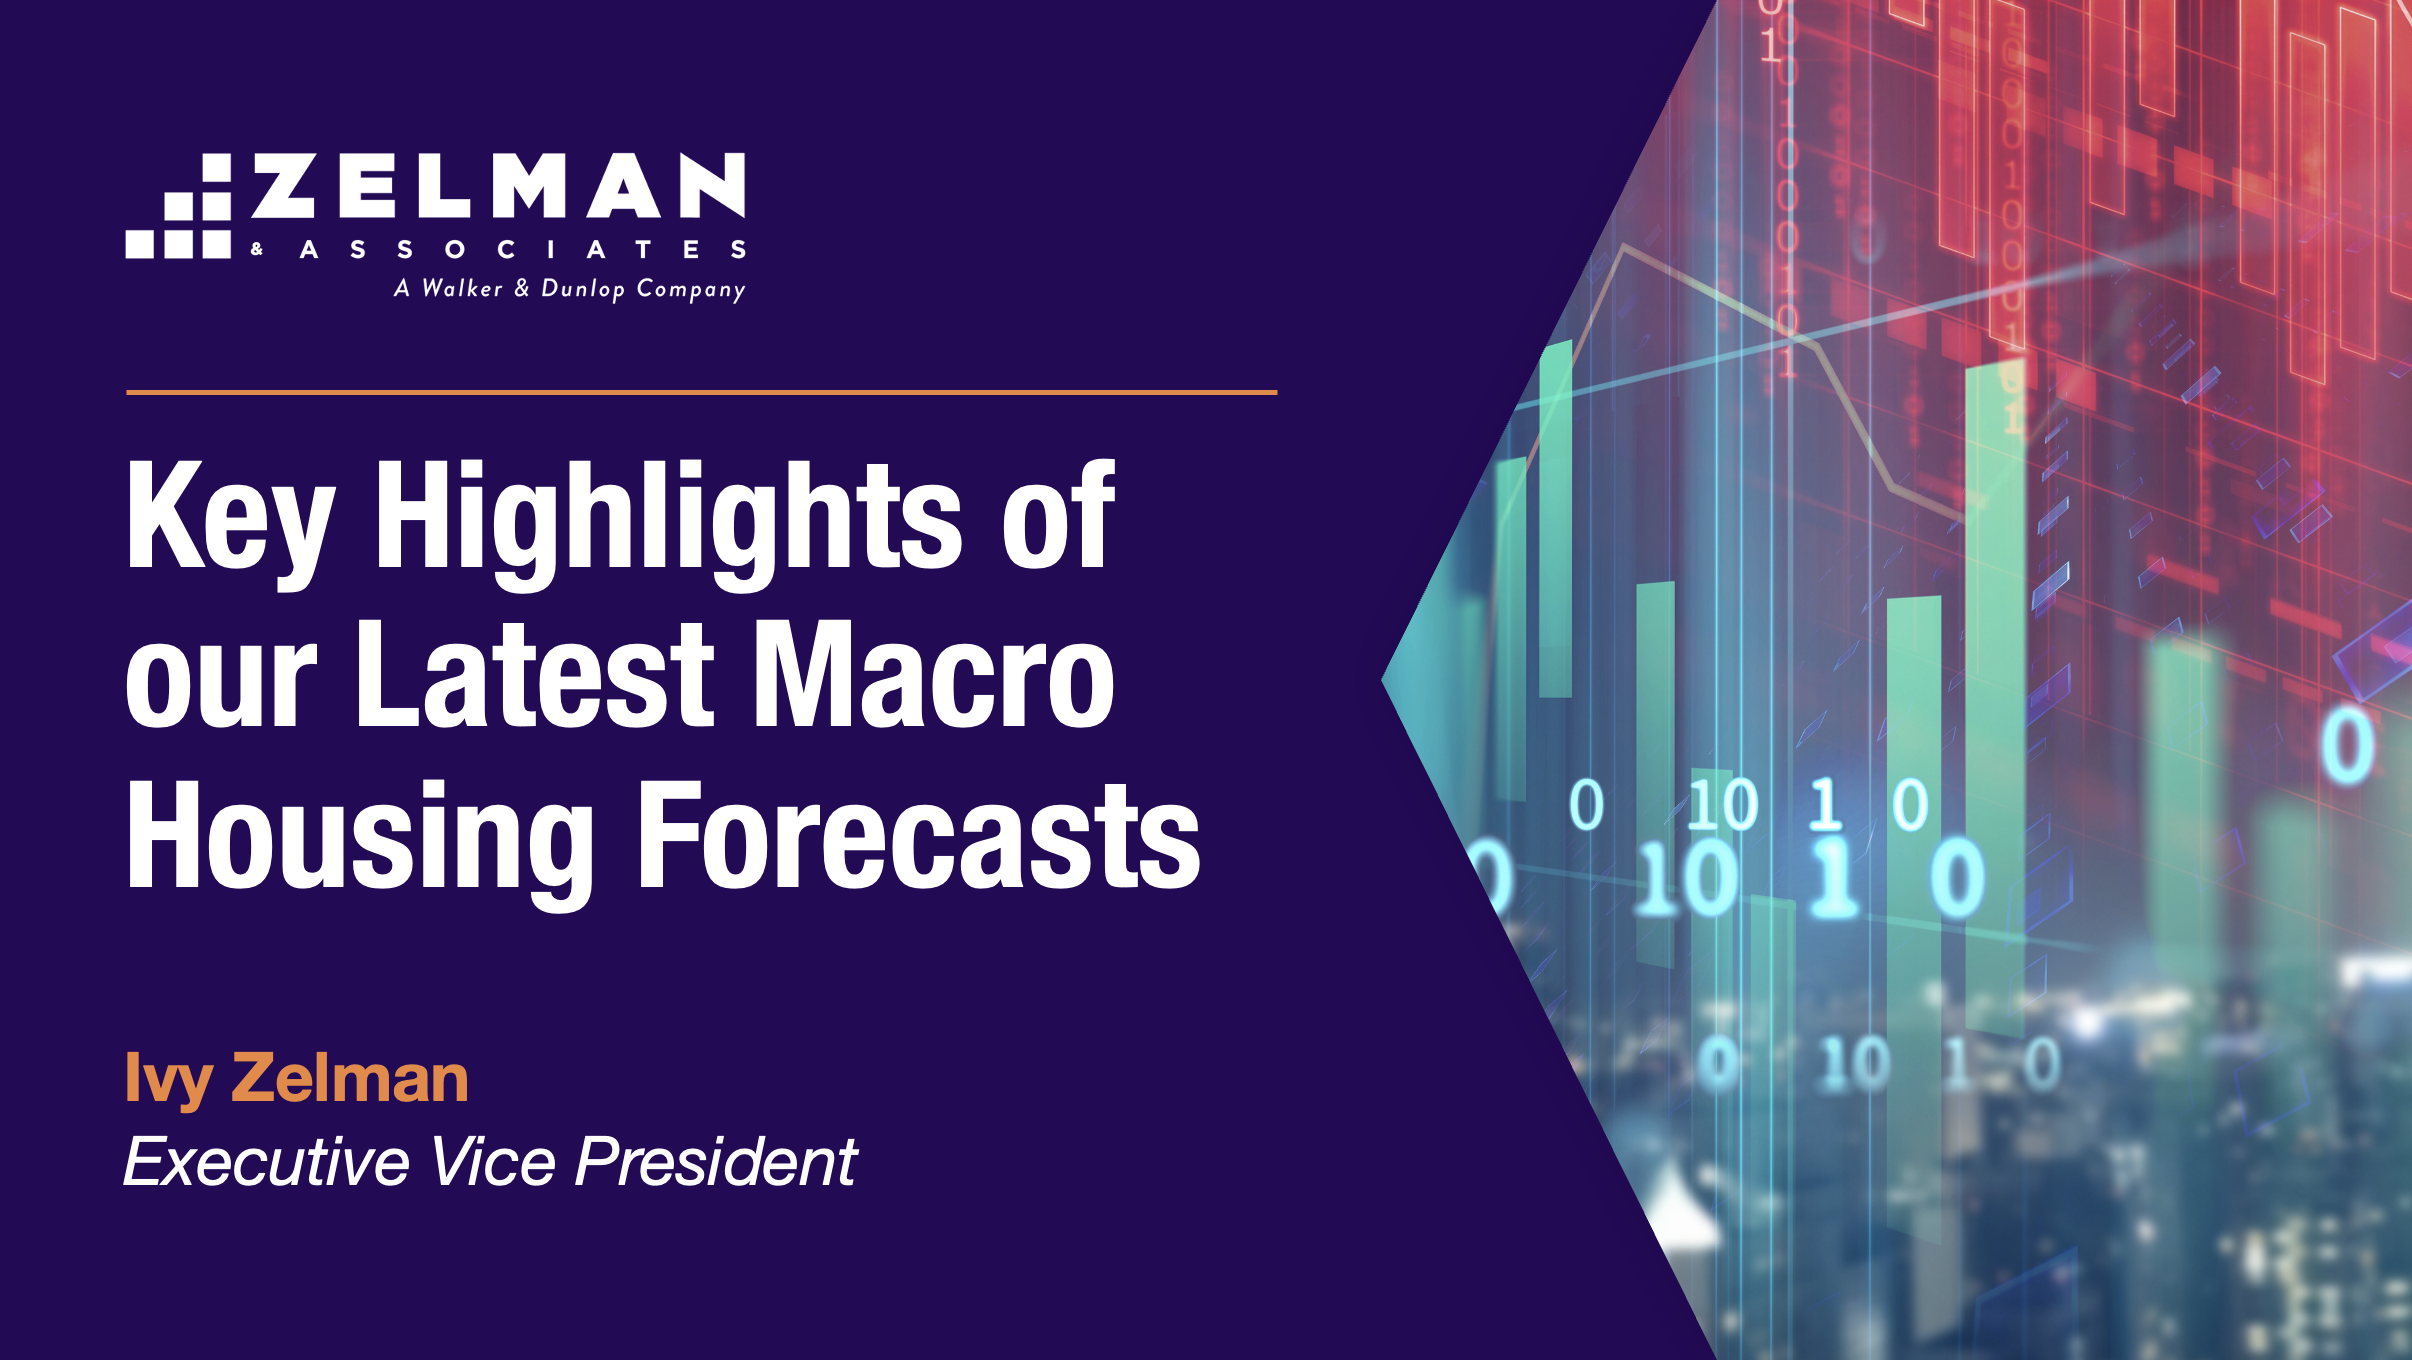 Key Highlights of our Latest Macro Housing Forecasts